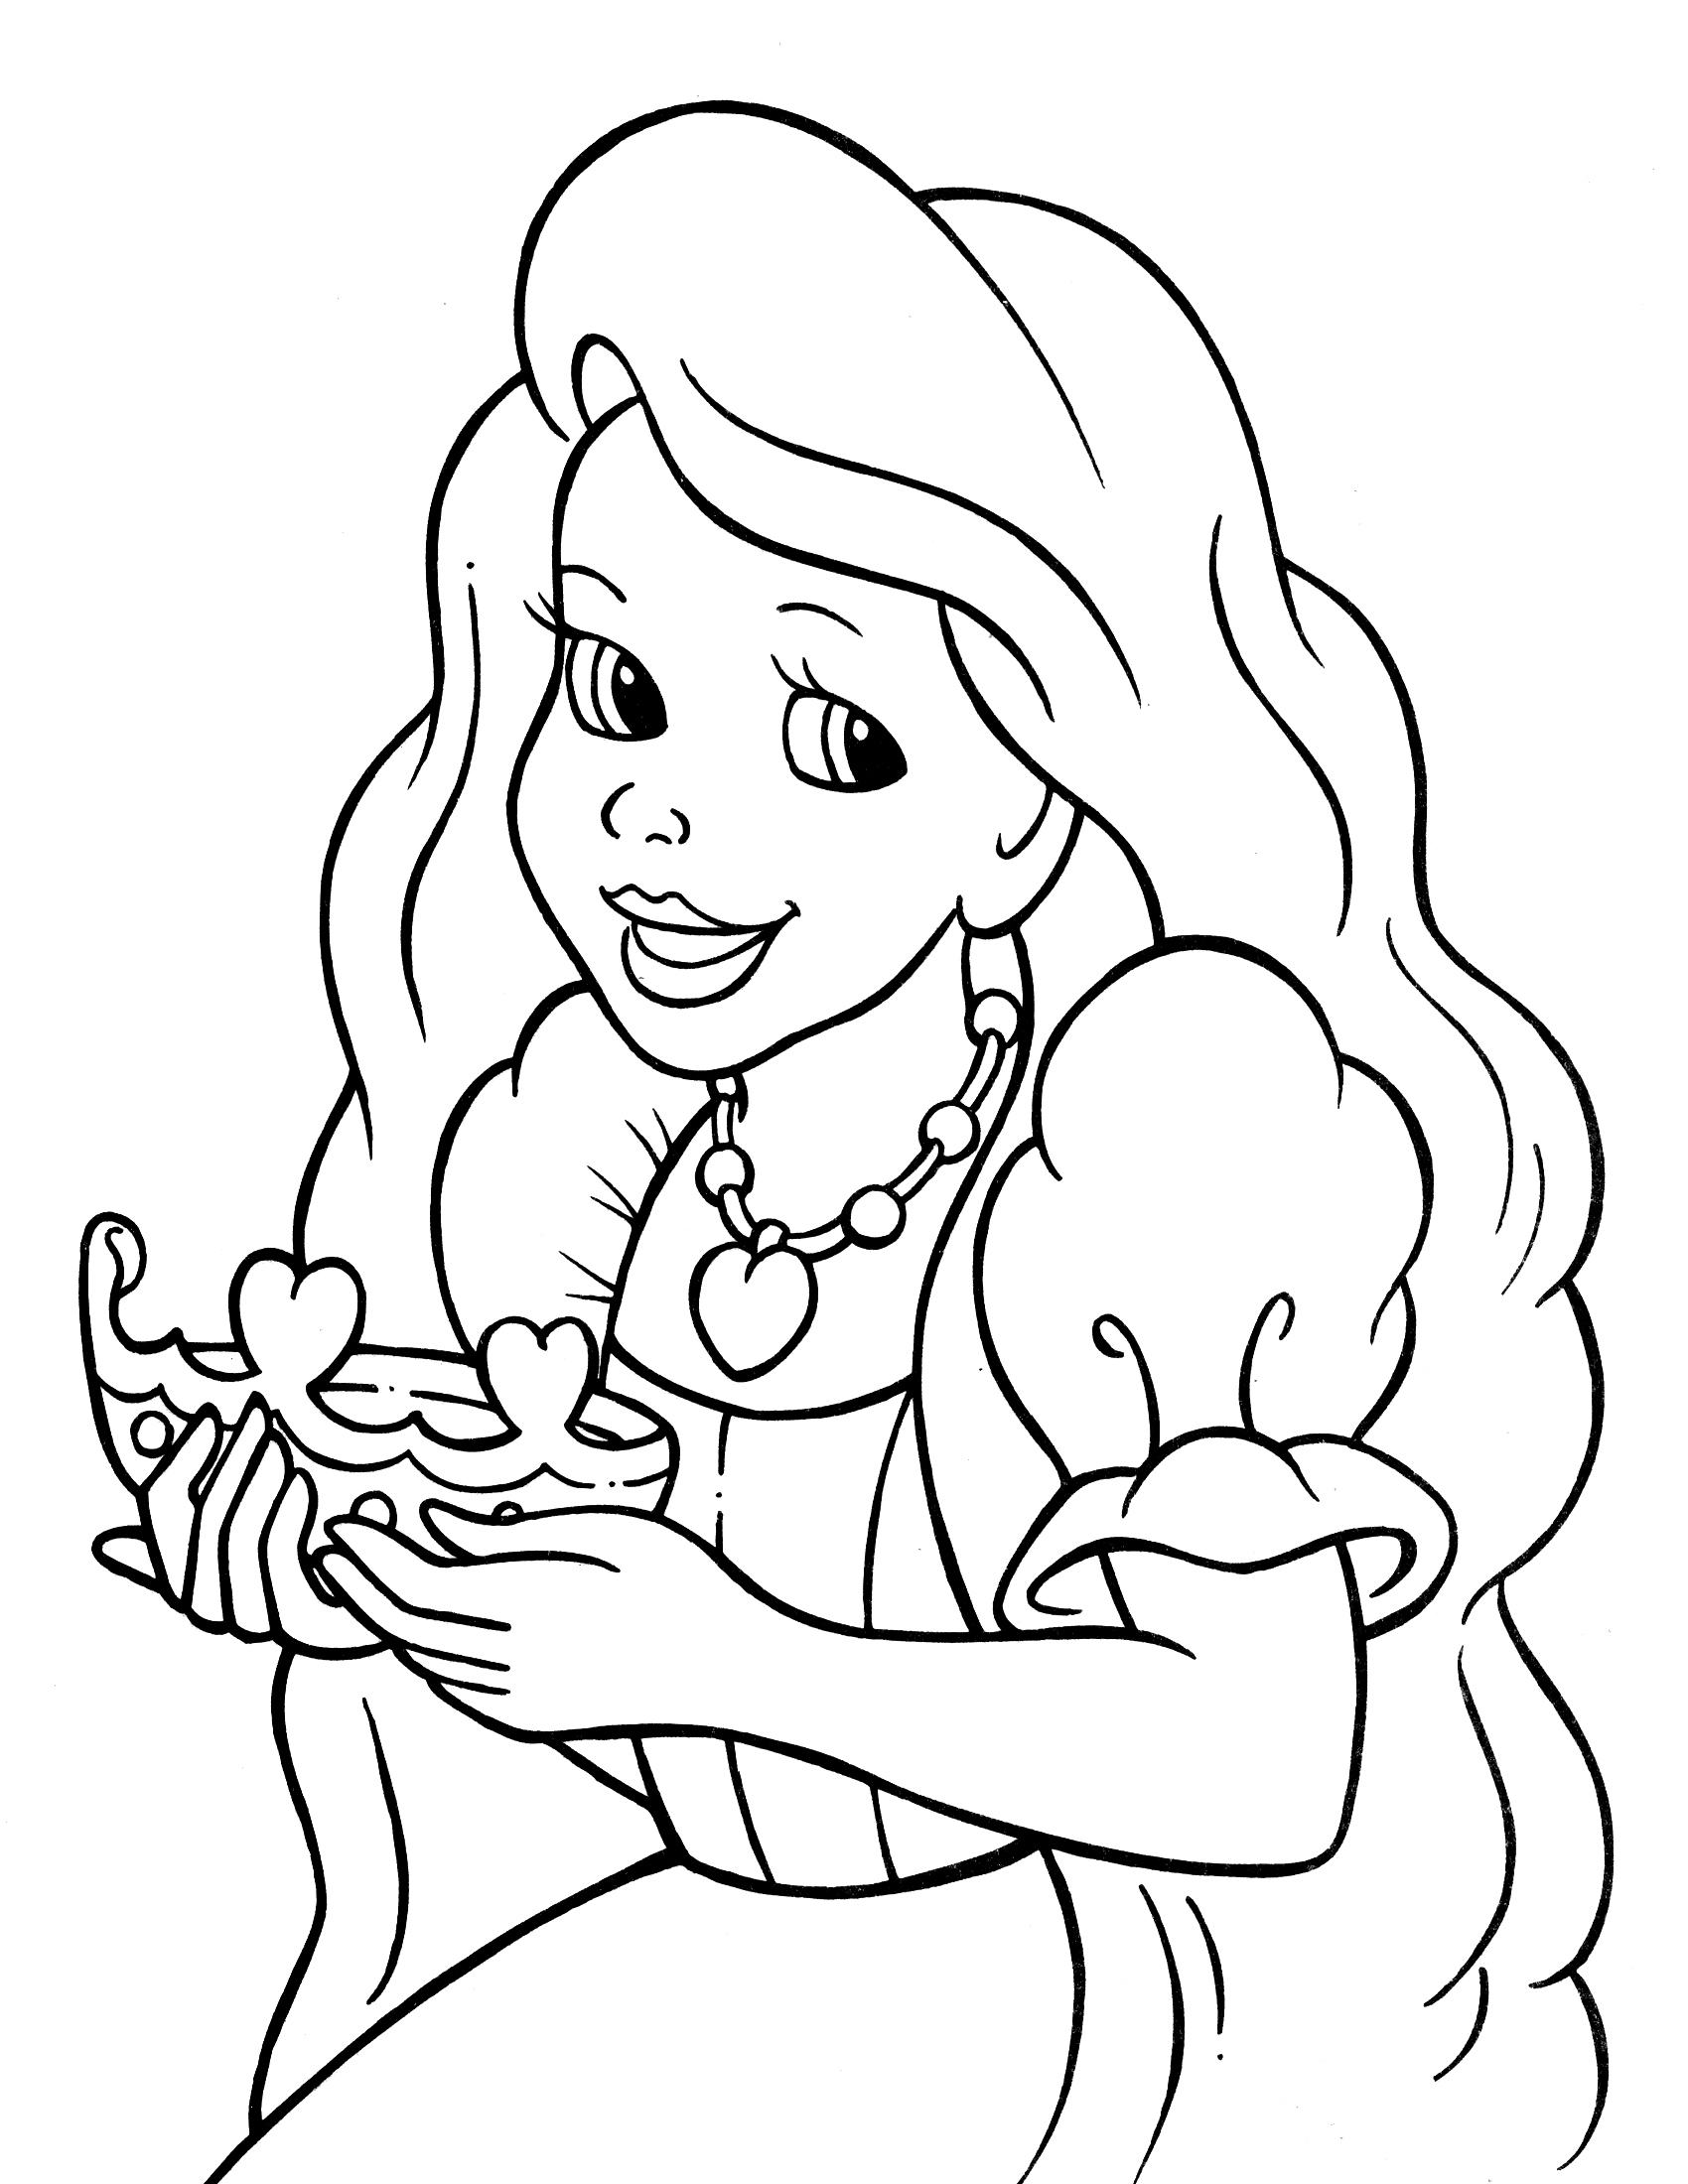 crayola-adult-coloring-pages-at-getdrawings-free-download